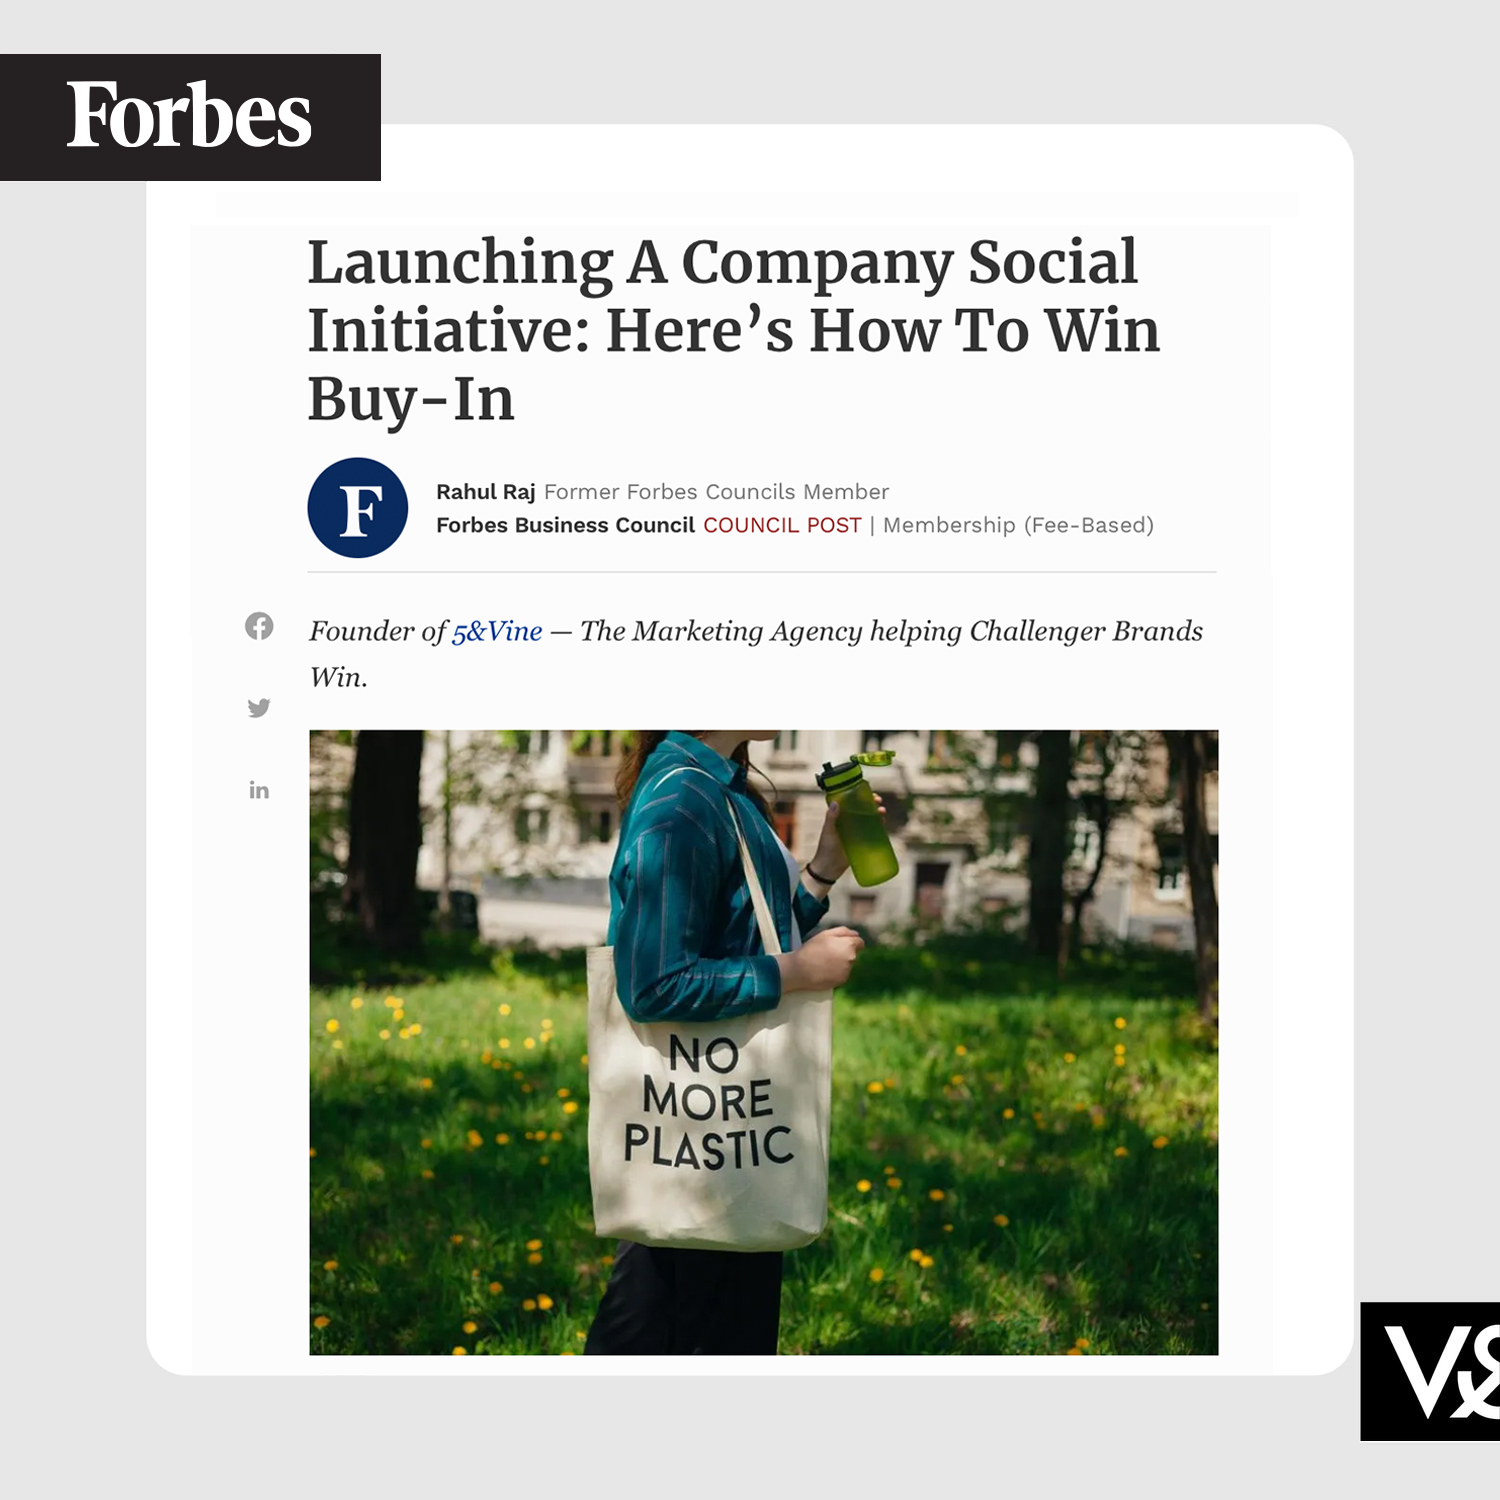 Forbes – Launching A Company Social Initiative